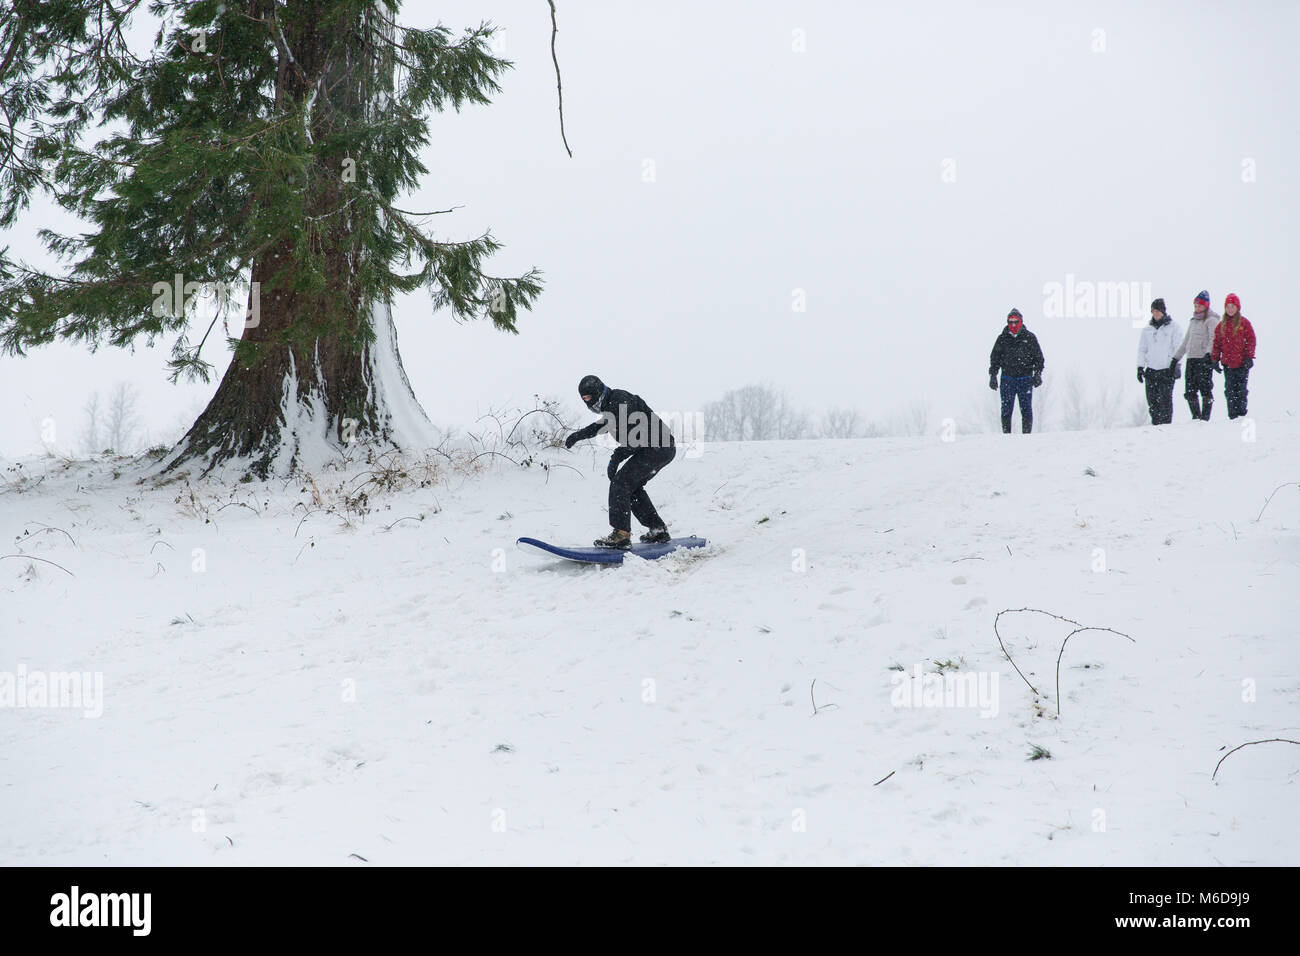 Celbridge, Kildare, Ireland. 02 Mar 2018: Teenagers using surf board to slide down the hill covered in snow. Beast from the east followed by storm Emma brought more snow and high winds across Ireland. Stock Photo